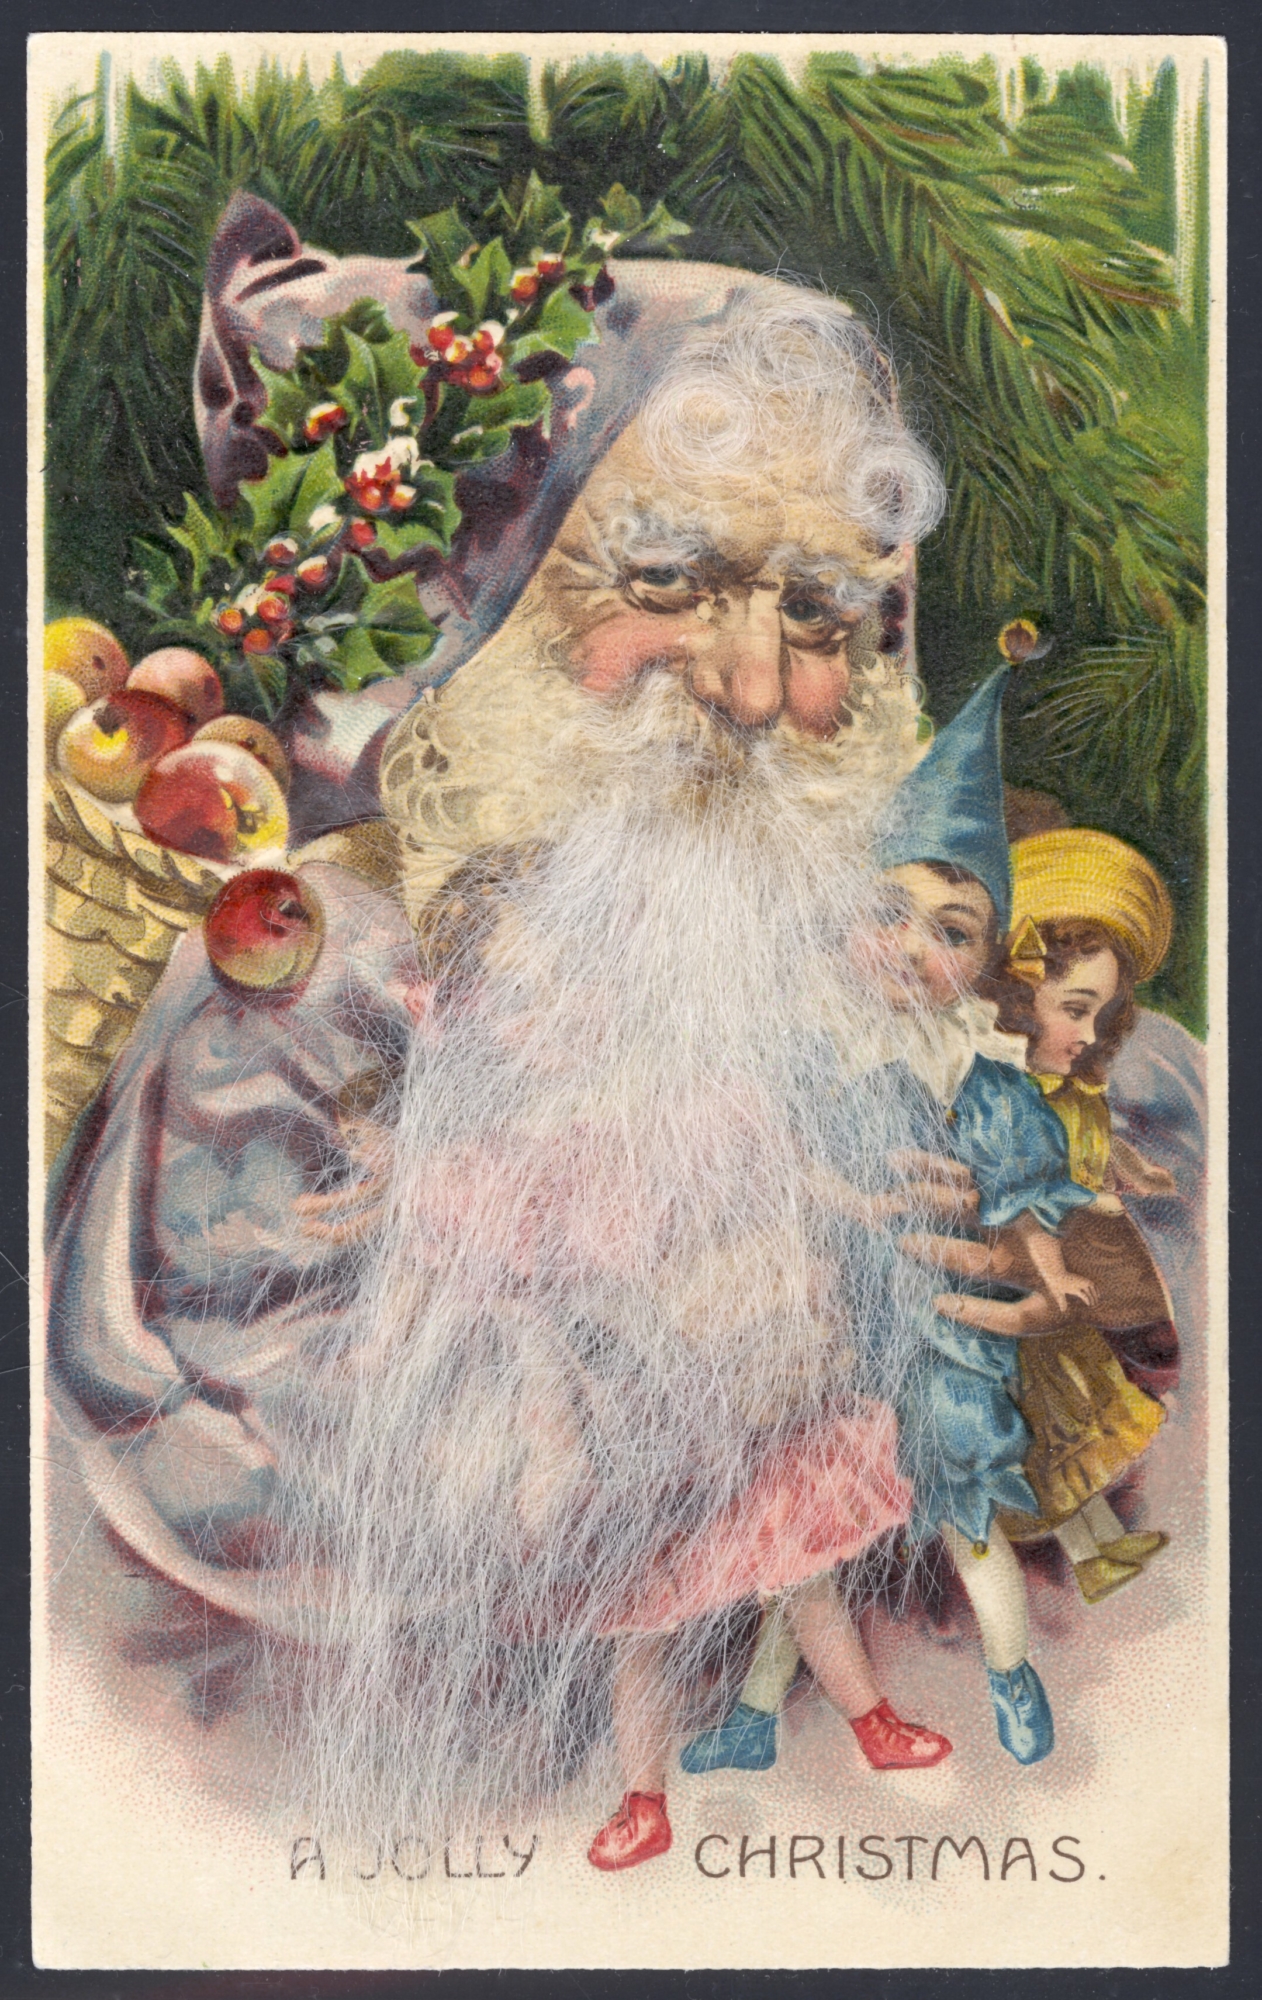 Santa wearing a blue robe. Lithographed in Germany (beard made from real hair)